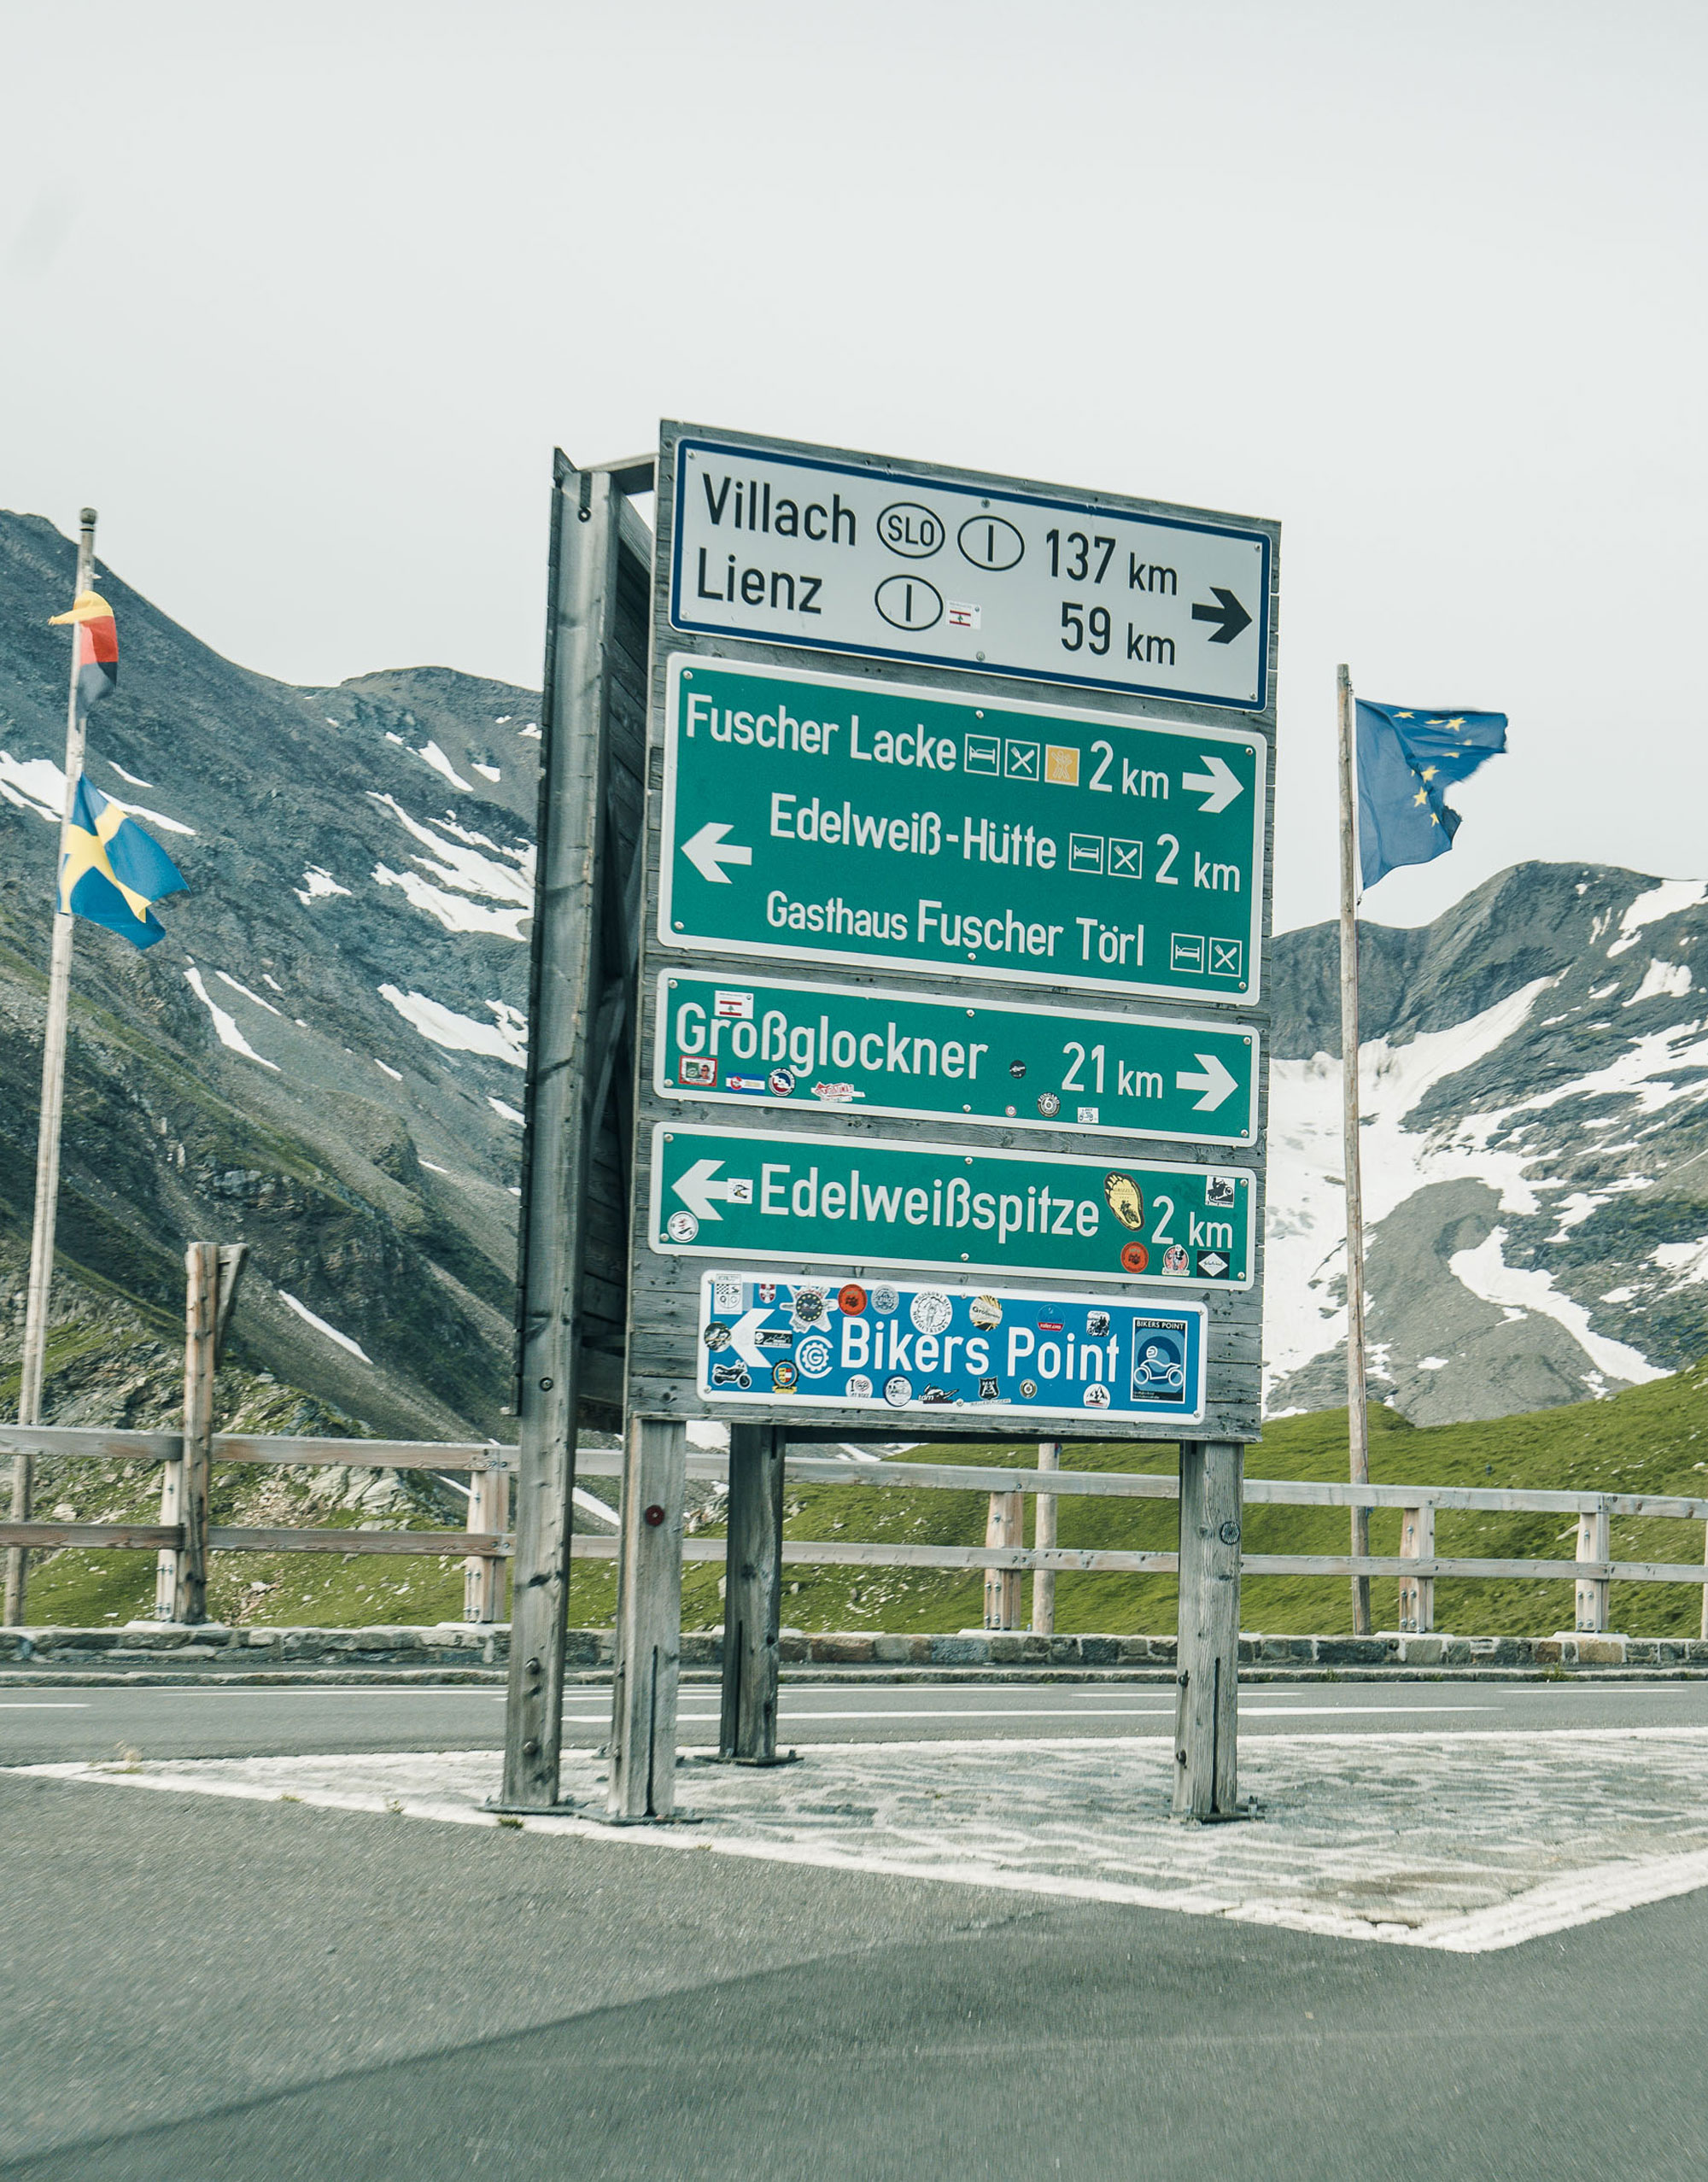 Sign saying ‘Großglockner 21km’, covered in stickers